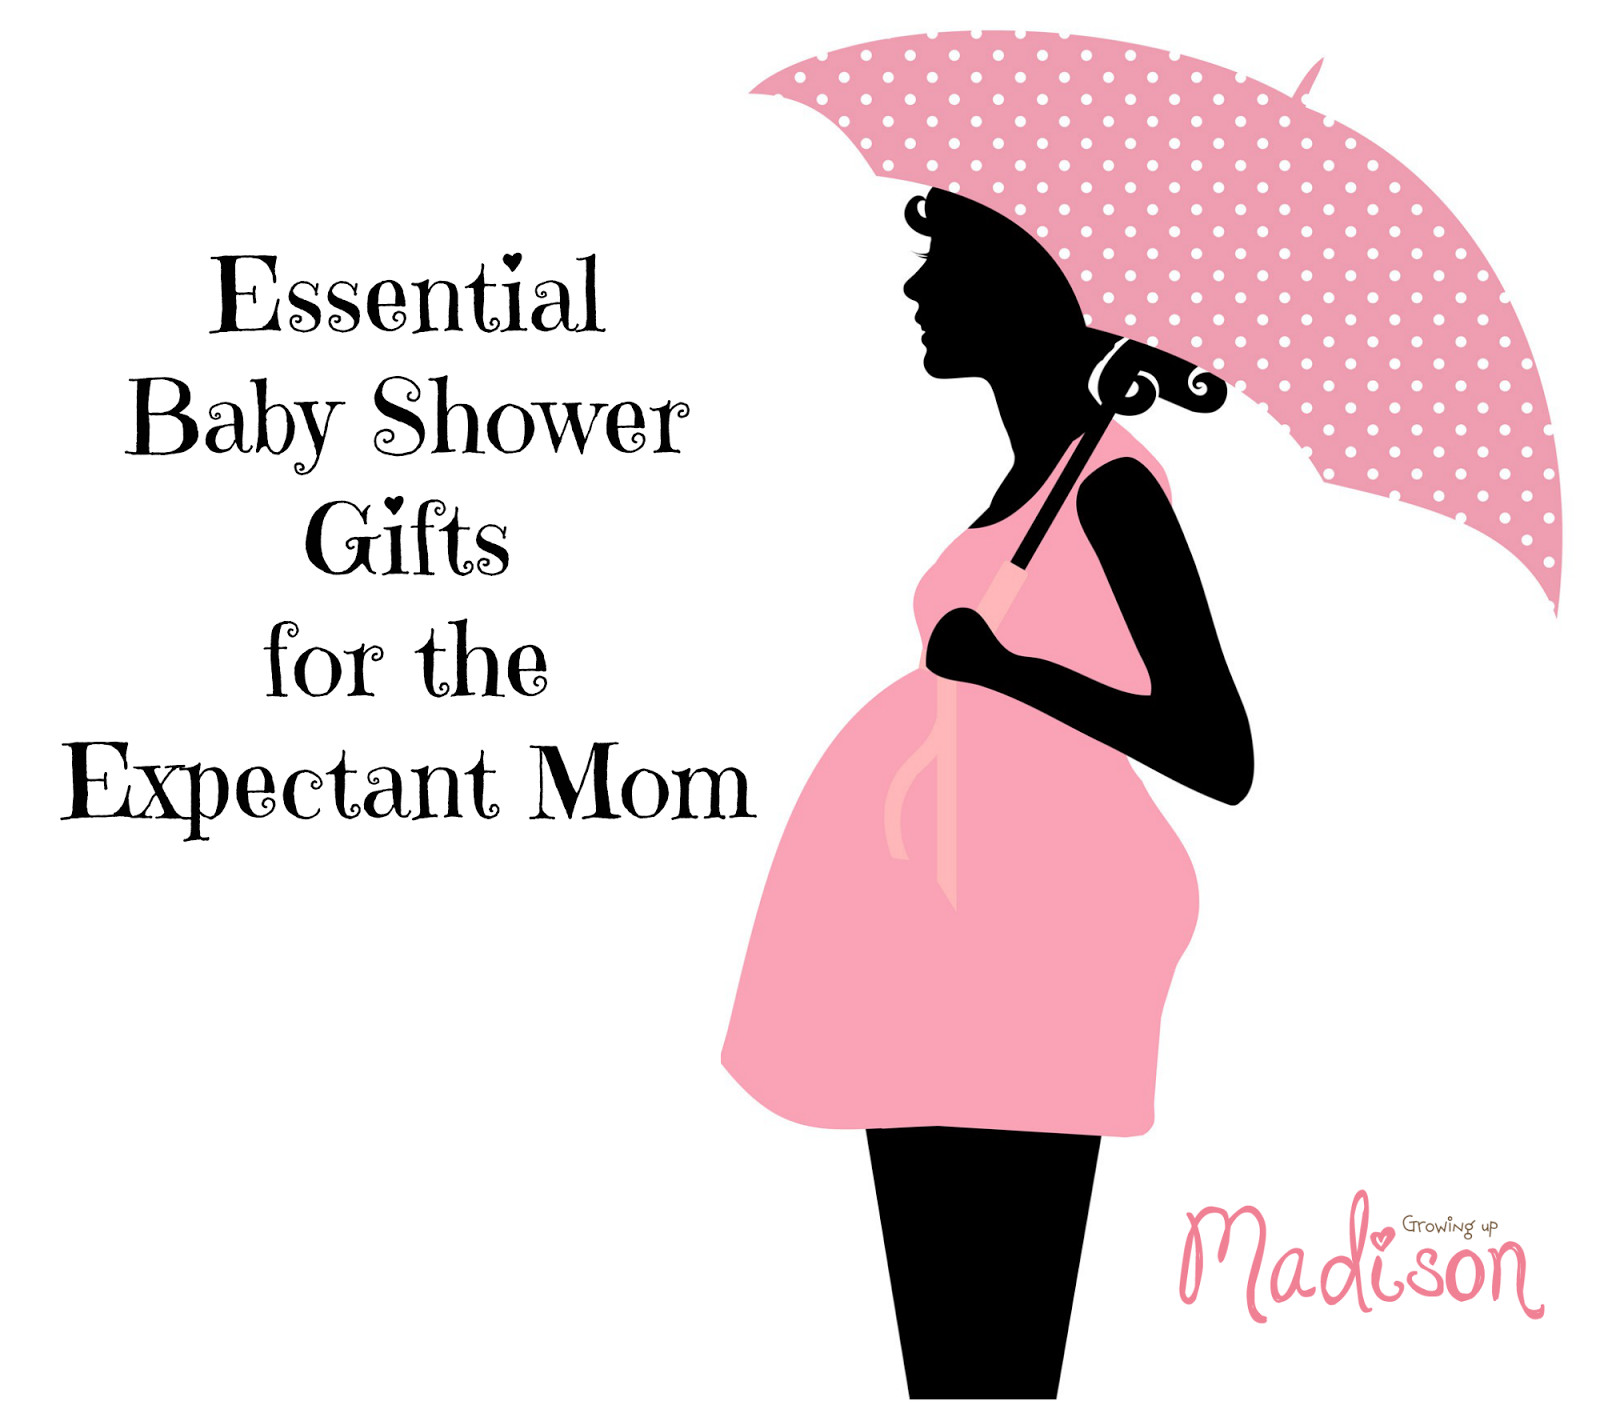 Essential Baby Shower Gifts
 Essential Baby Shower Gifts For the Expectant Mom Fresh